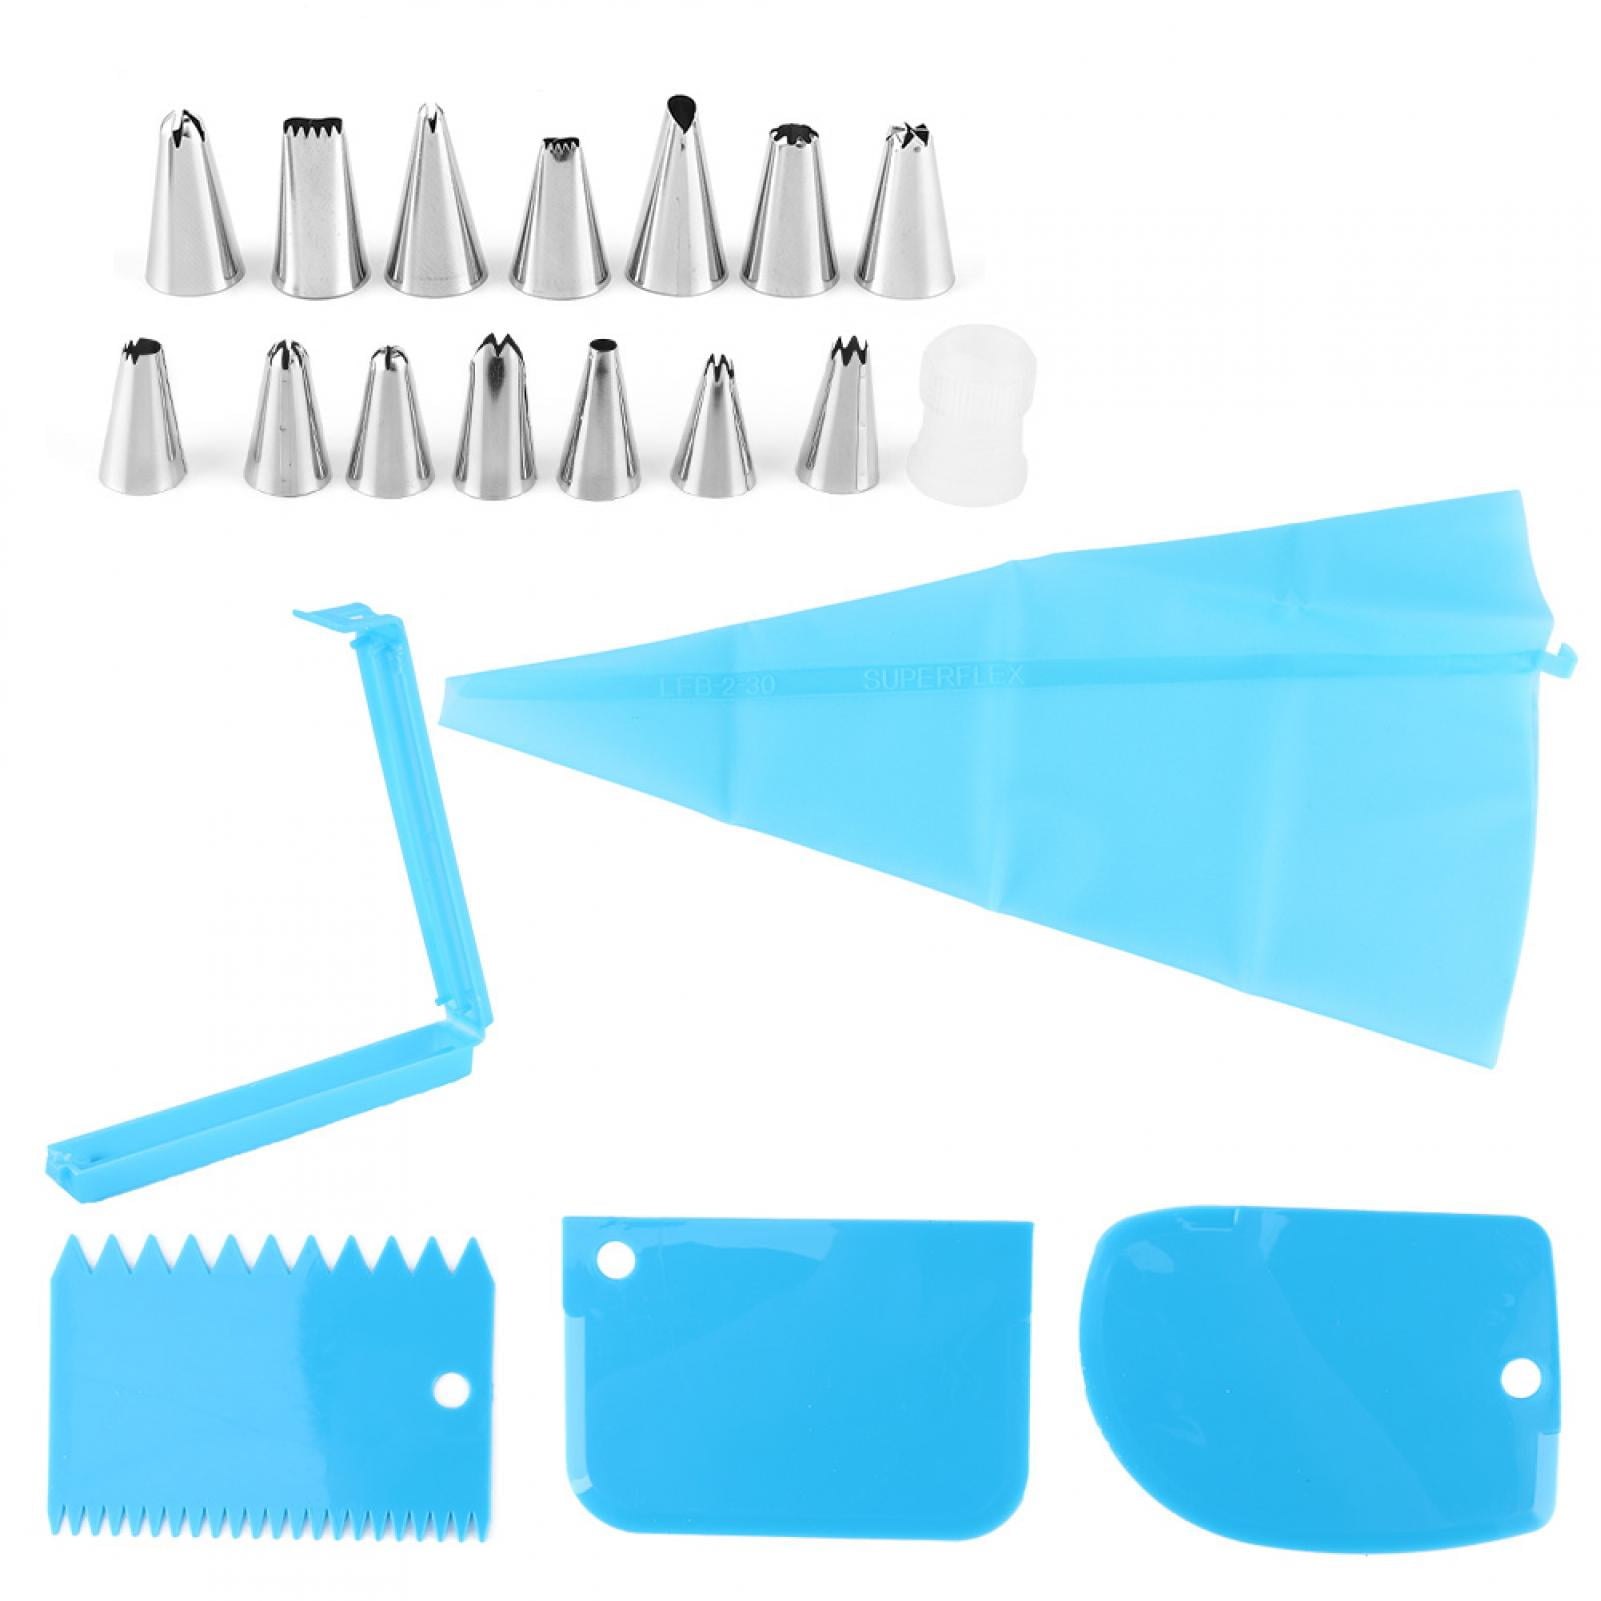 Details about   20Pcs Cake Baking Decorating Kit Set Piping Nozzles Cream Squeeze Bag Tools 